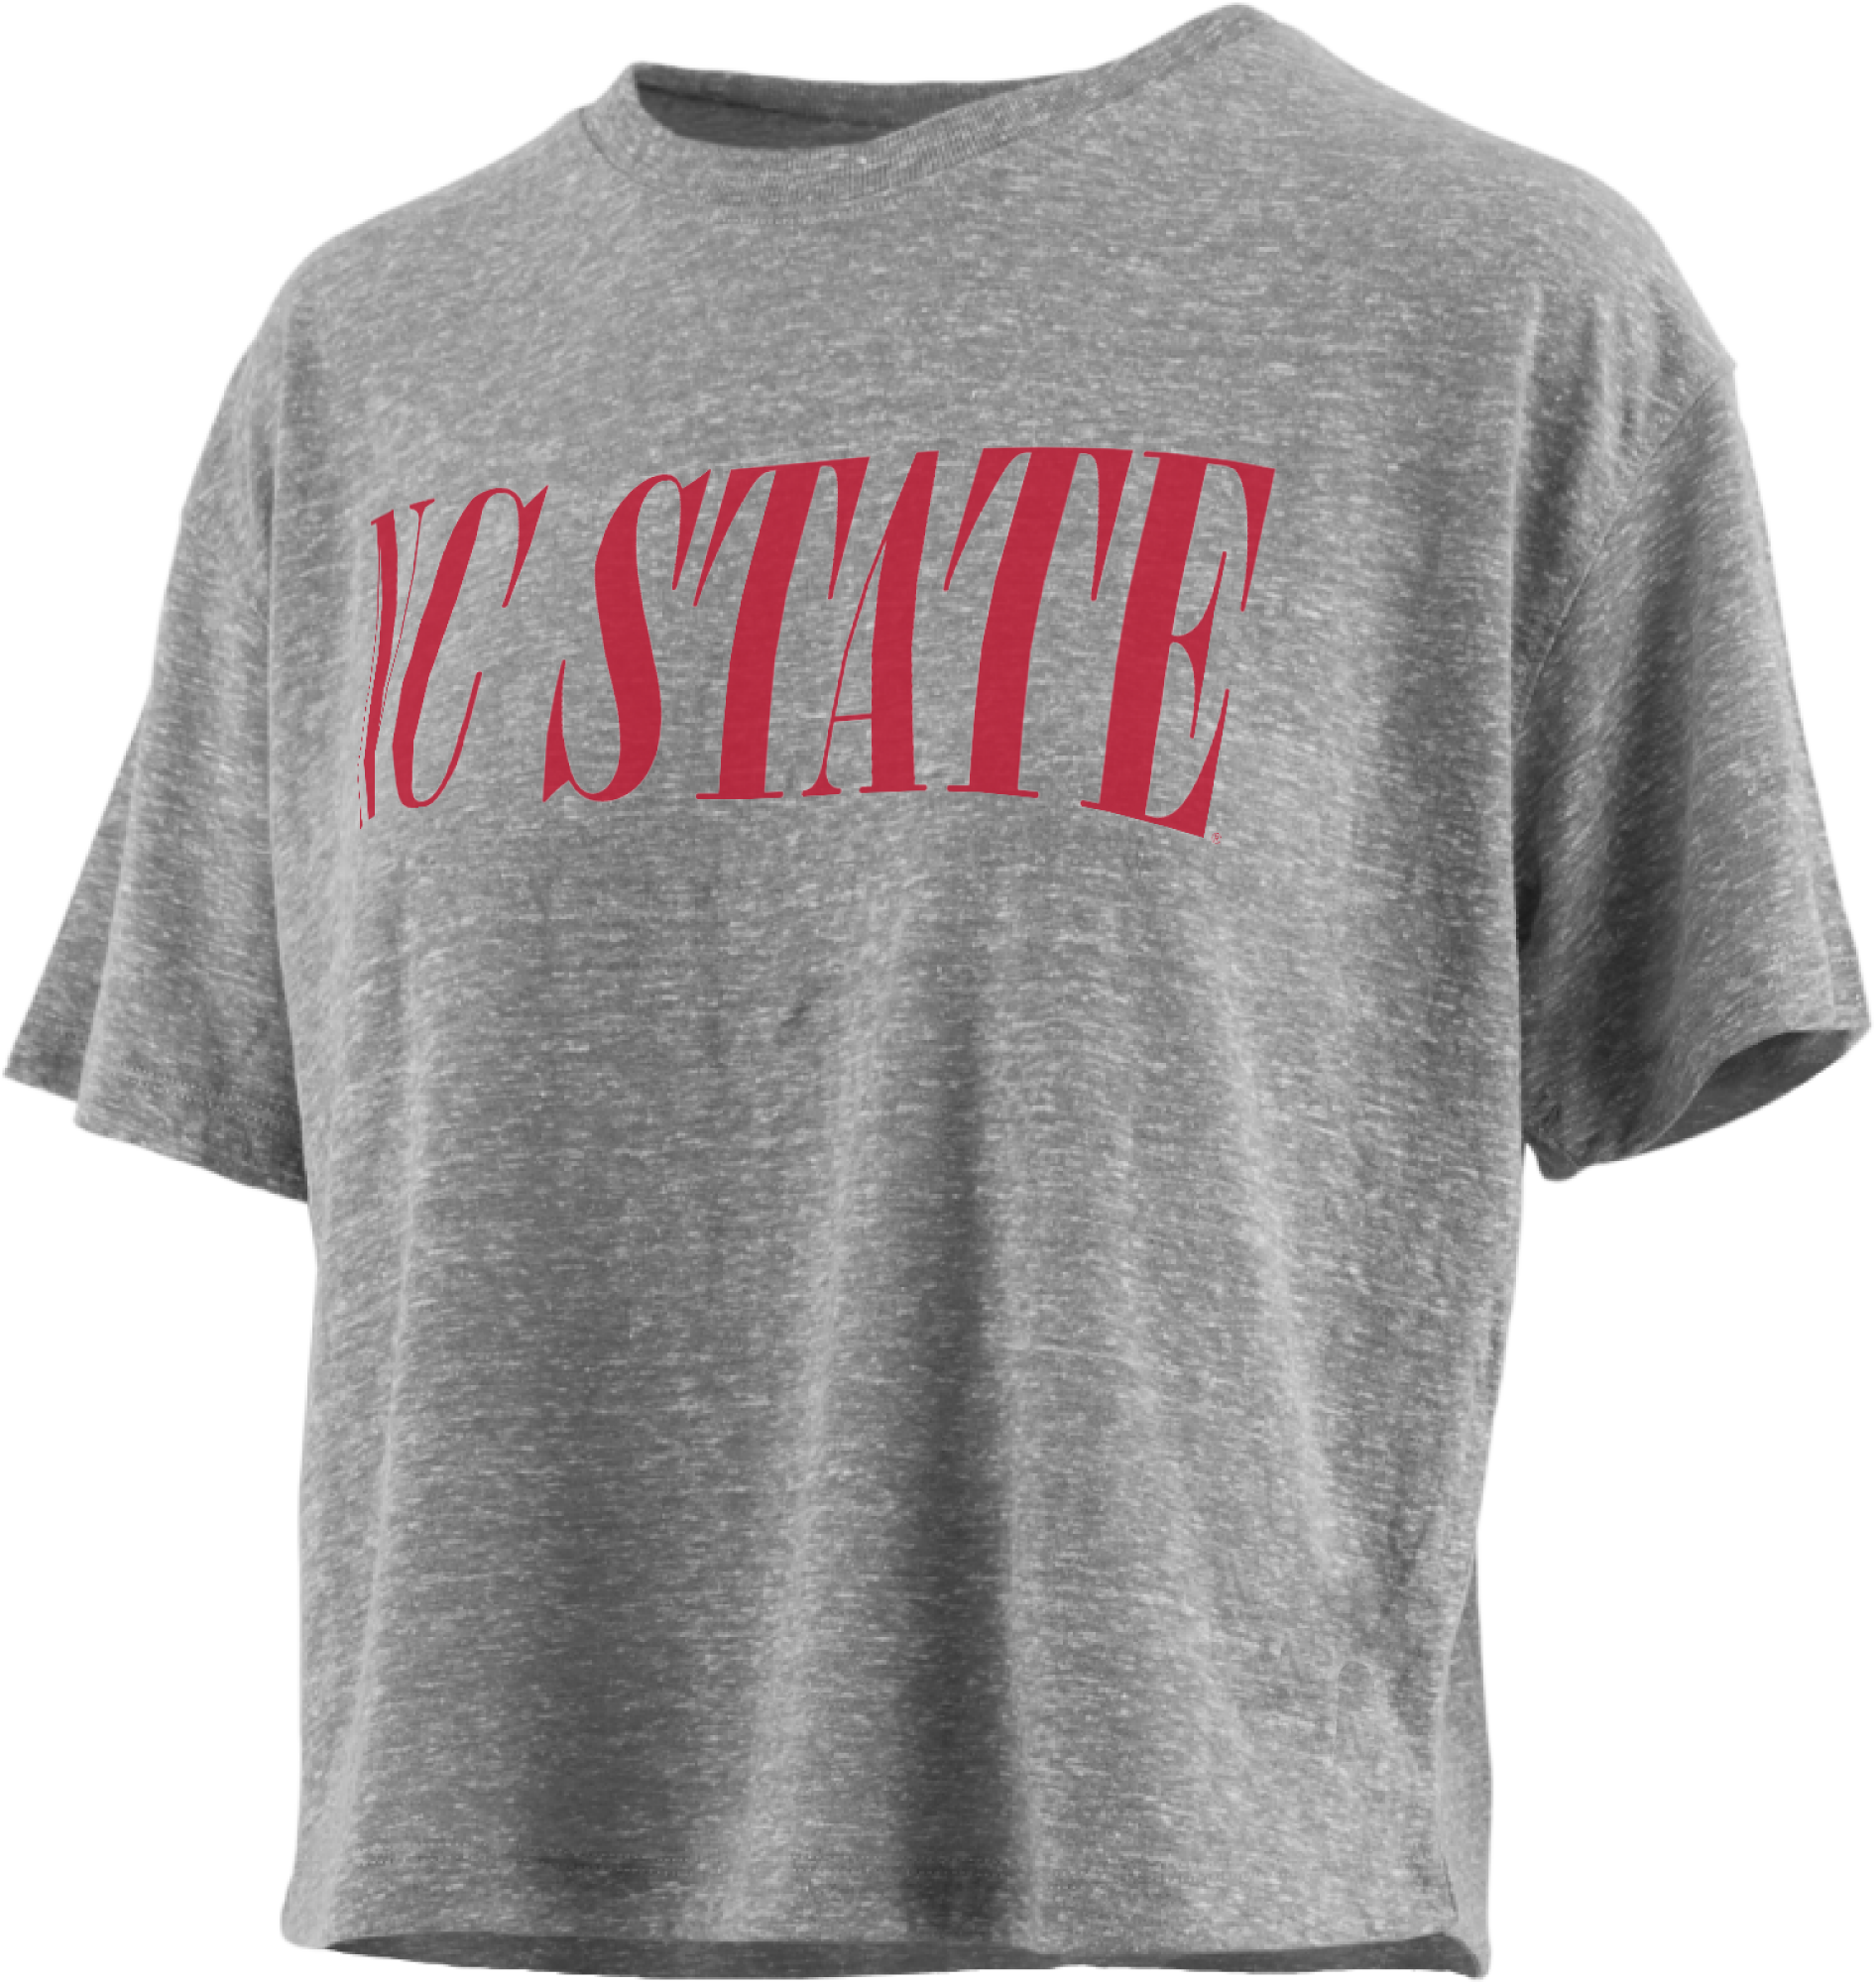 NC State Wolfpack Women's Heather Grey Showtime Crop Top